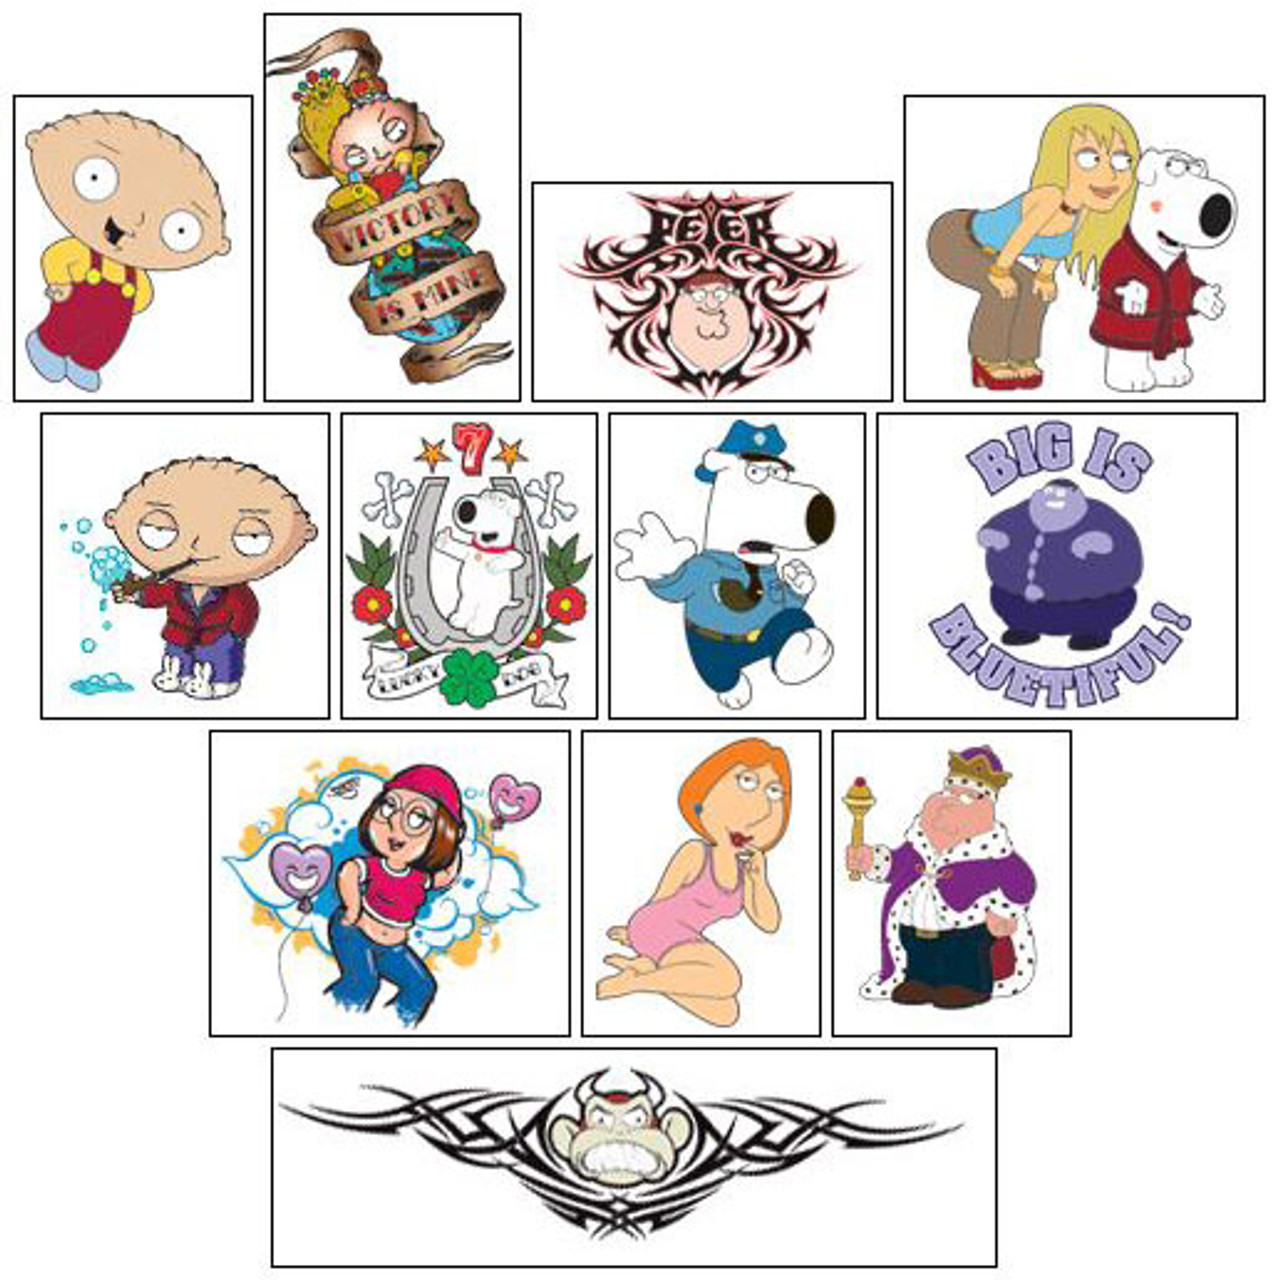 Download Family Guy Vending Tattoos - CandyMachines.com